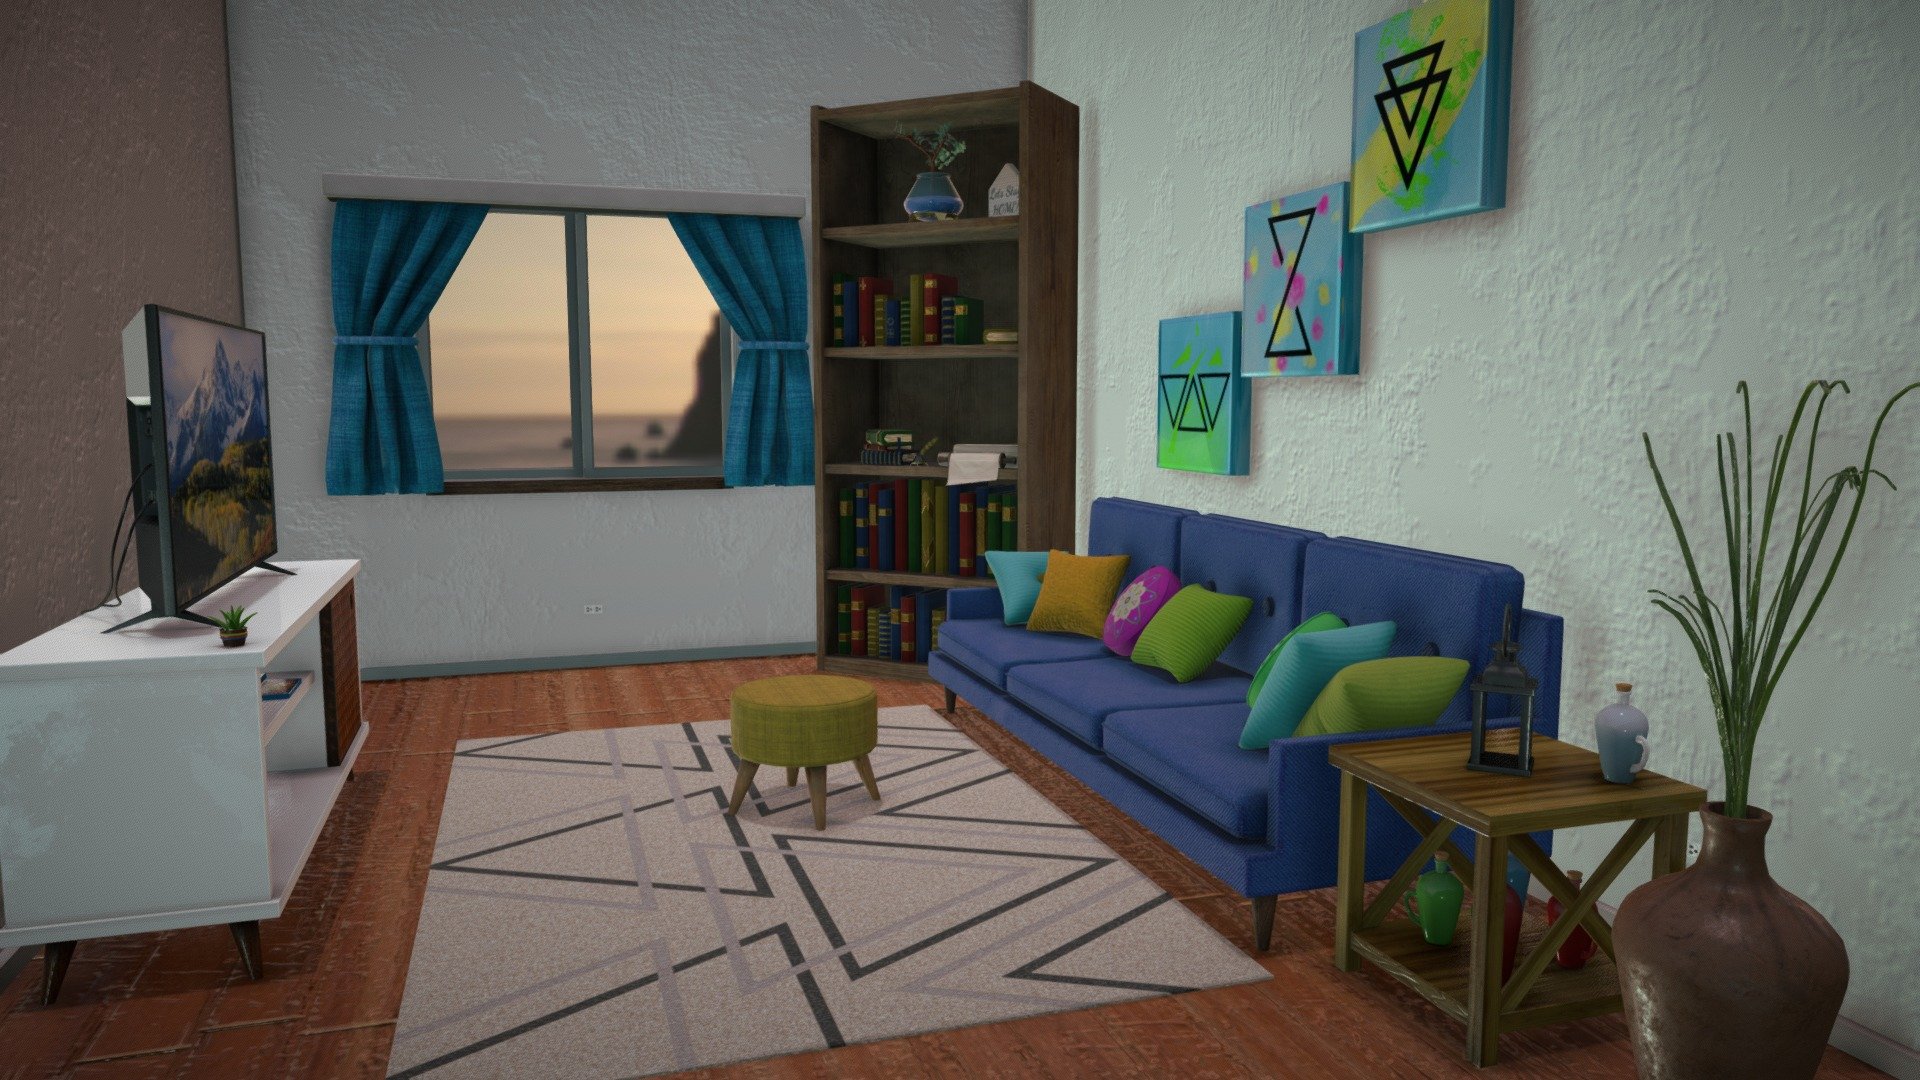 Livingroom environment everything was made by me, props, models, and textures.
Models are kept to a fairly low poly to make sure things run smooth.

To be honest I may want to change my real living room to match this.

WIth Purchace you get models and textures for all of the following:
Couch, Ottoman, Pillows, Book Shelf, Books, End Table, Tv, Tv stand, Paintings, Decorations, and Miscelanious Models

Thank you for your support 3d model